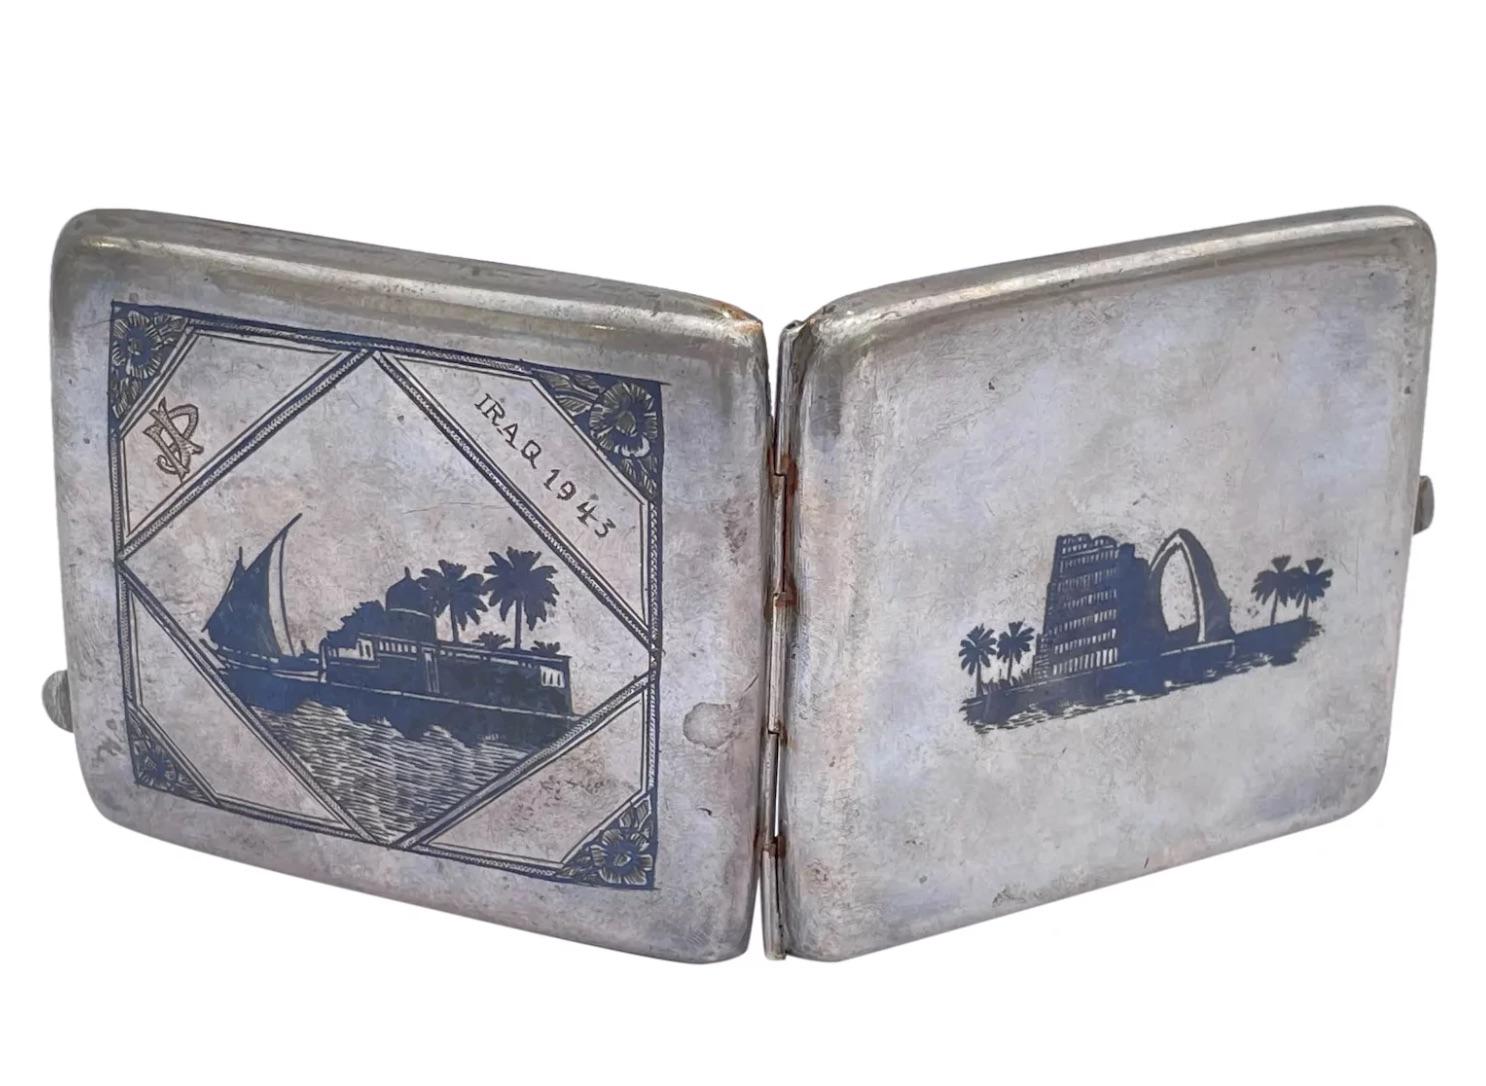 Iraqi Niello Silver Cigarette Box

Consistent with age and use please see the photos for condition
Please ask for more photos if you need we will send them with in 24-48 hours

Due to the item's age do not expect items to be in perfect condition and